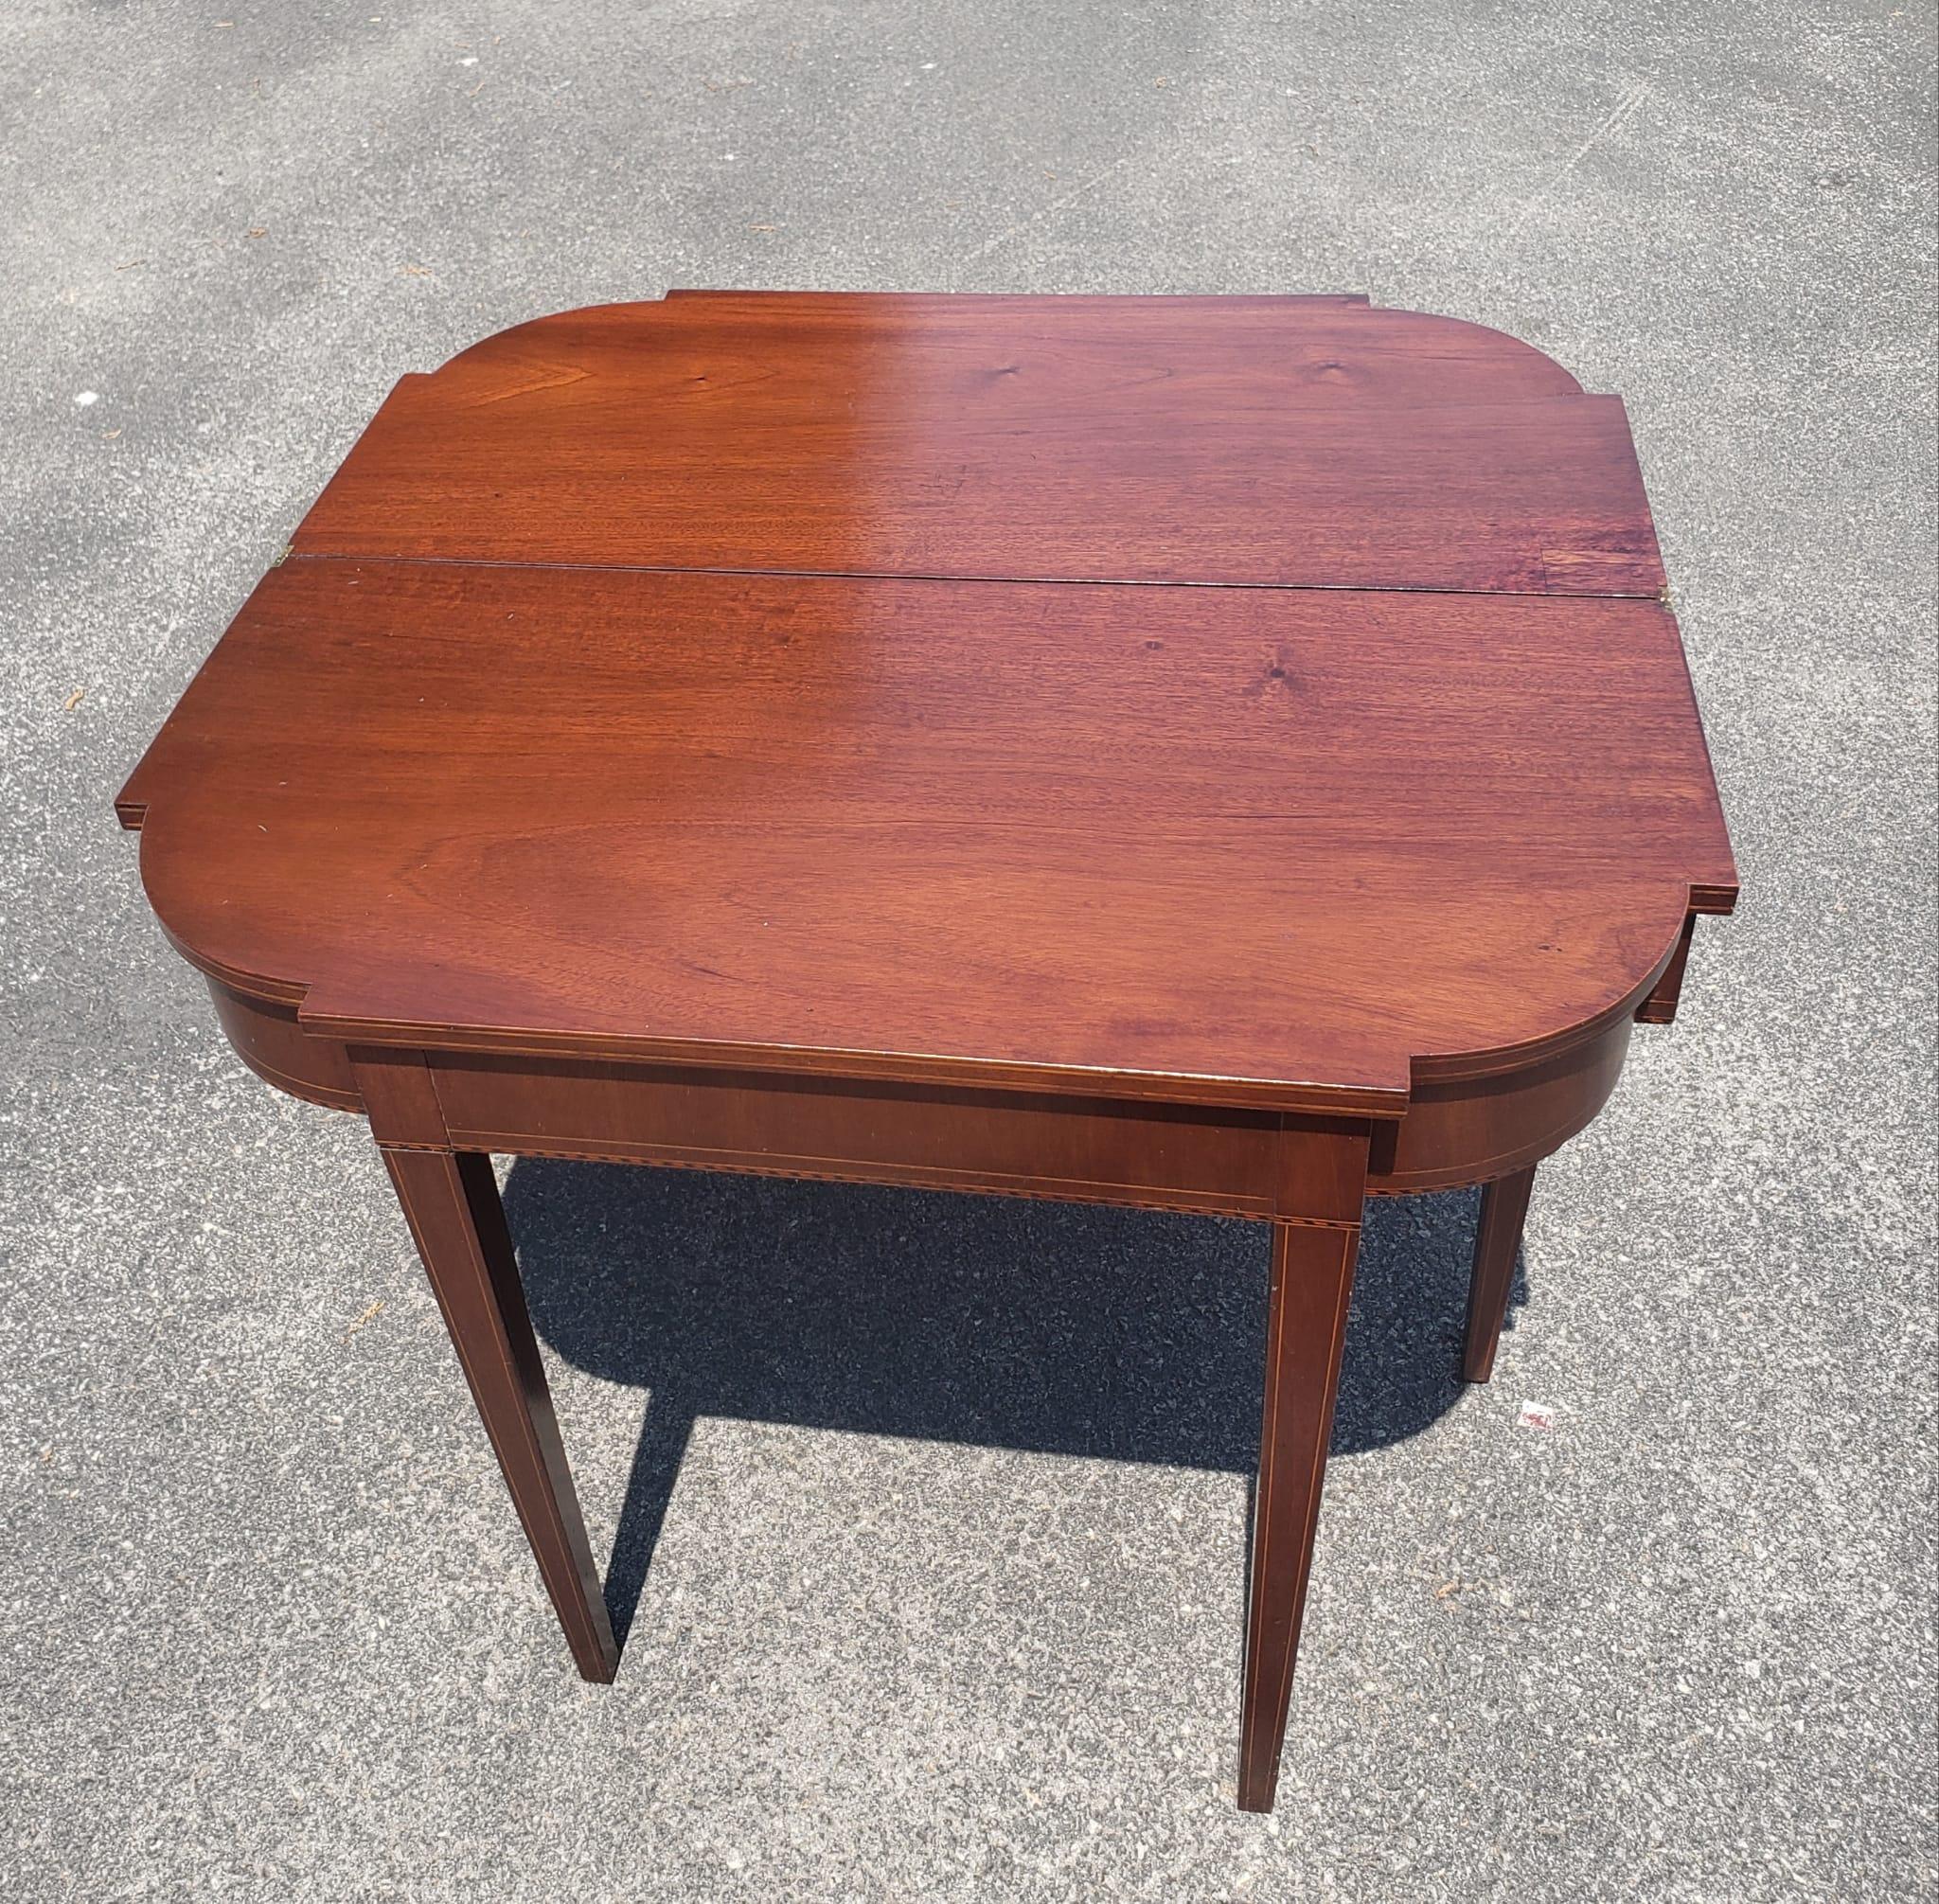 Inlay Federal Style Inlaid Mahogany Fold-Top Console Table, Circa 1920s For Sale